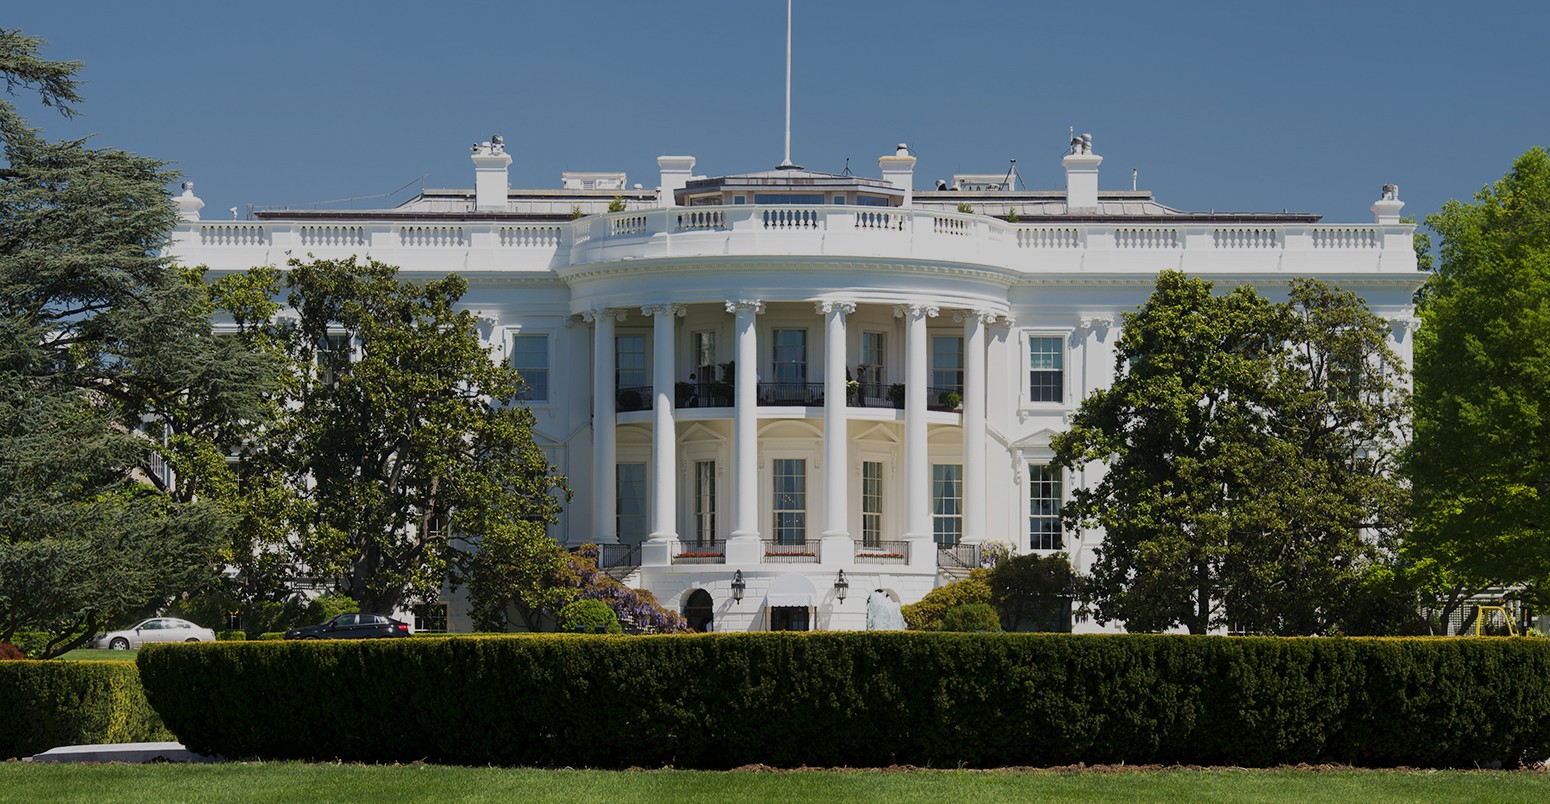 The White House